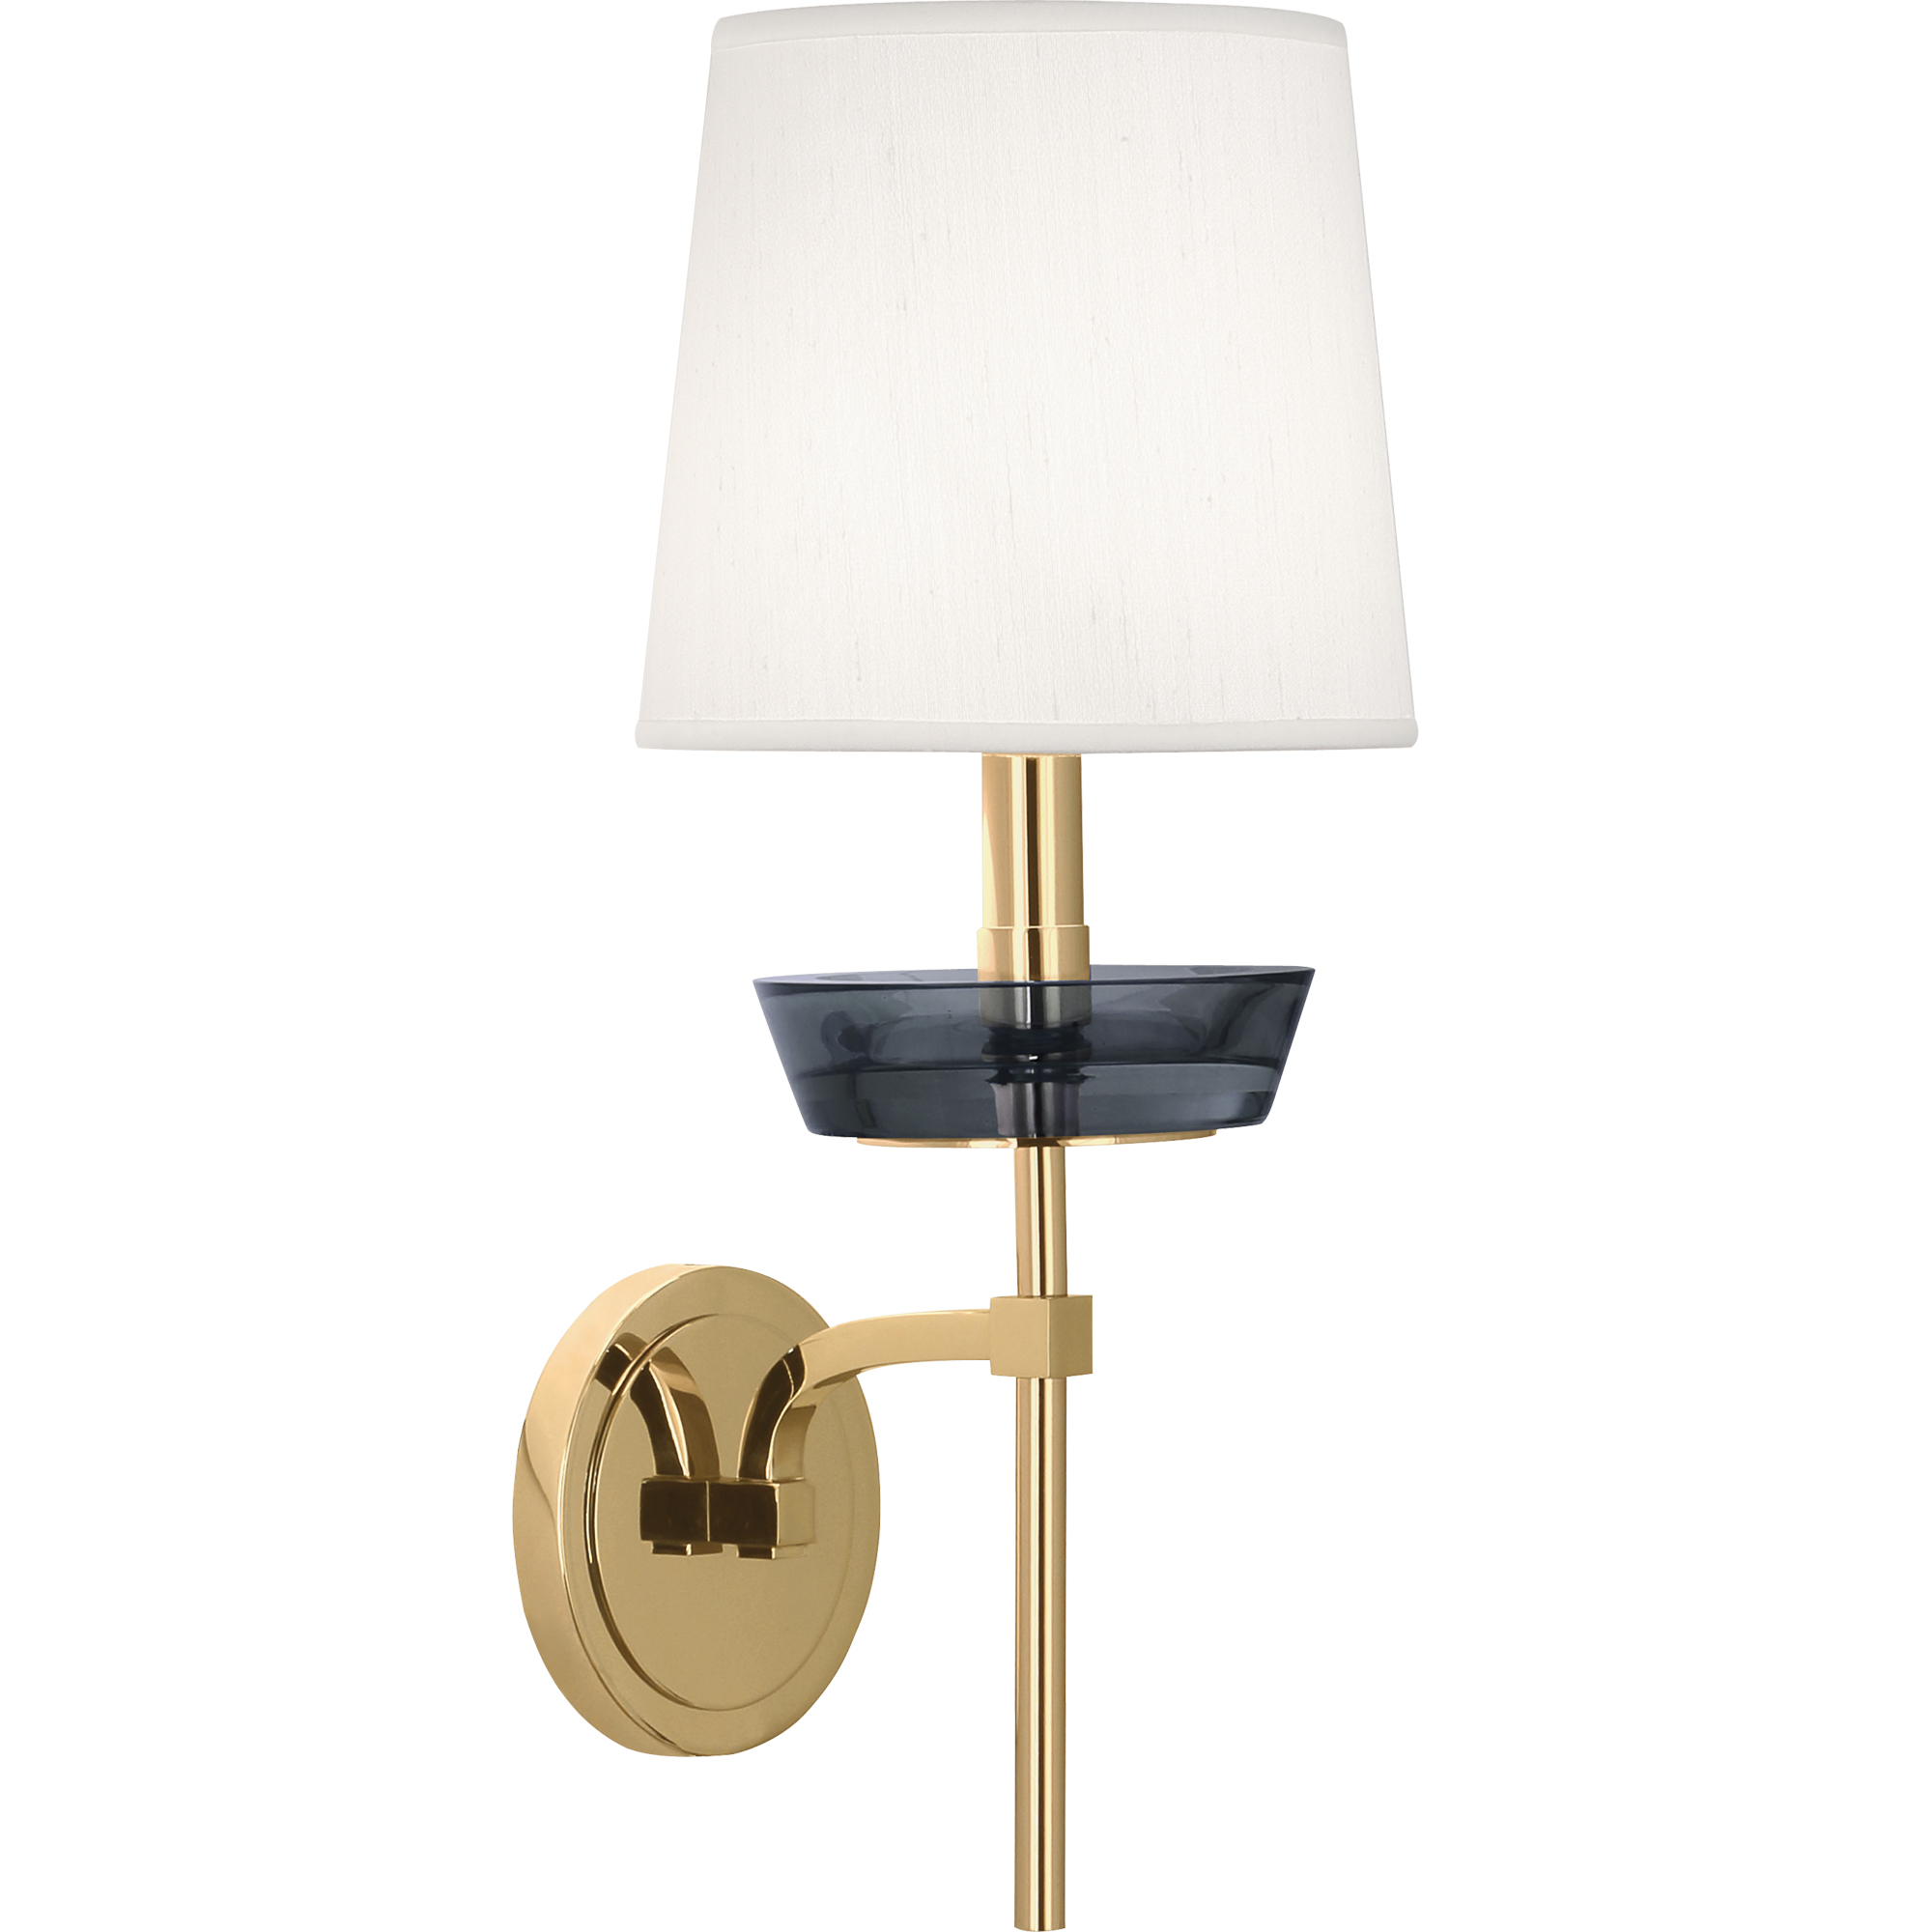 Cristallo Wall Sconce Style #629